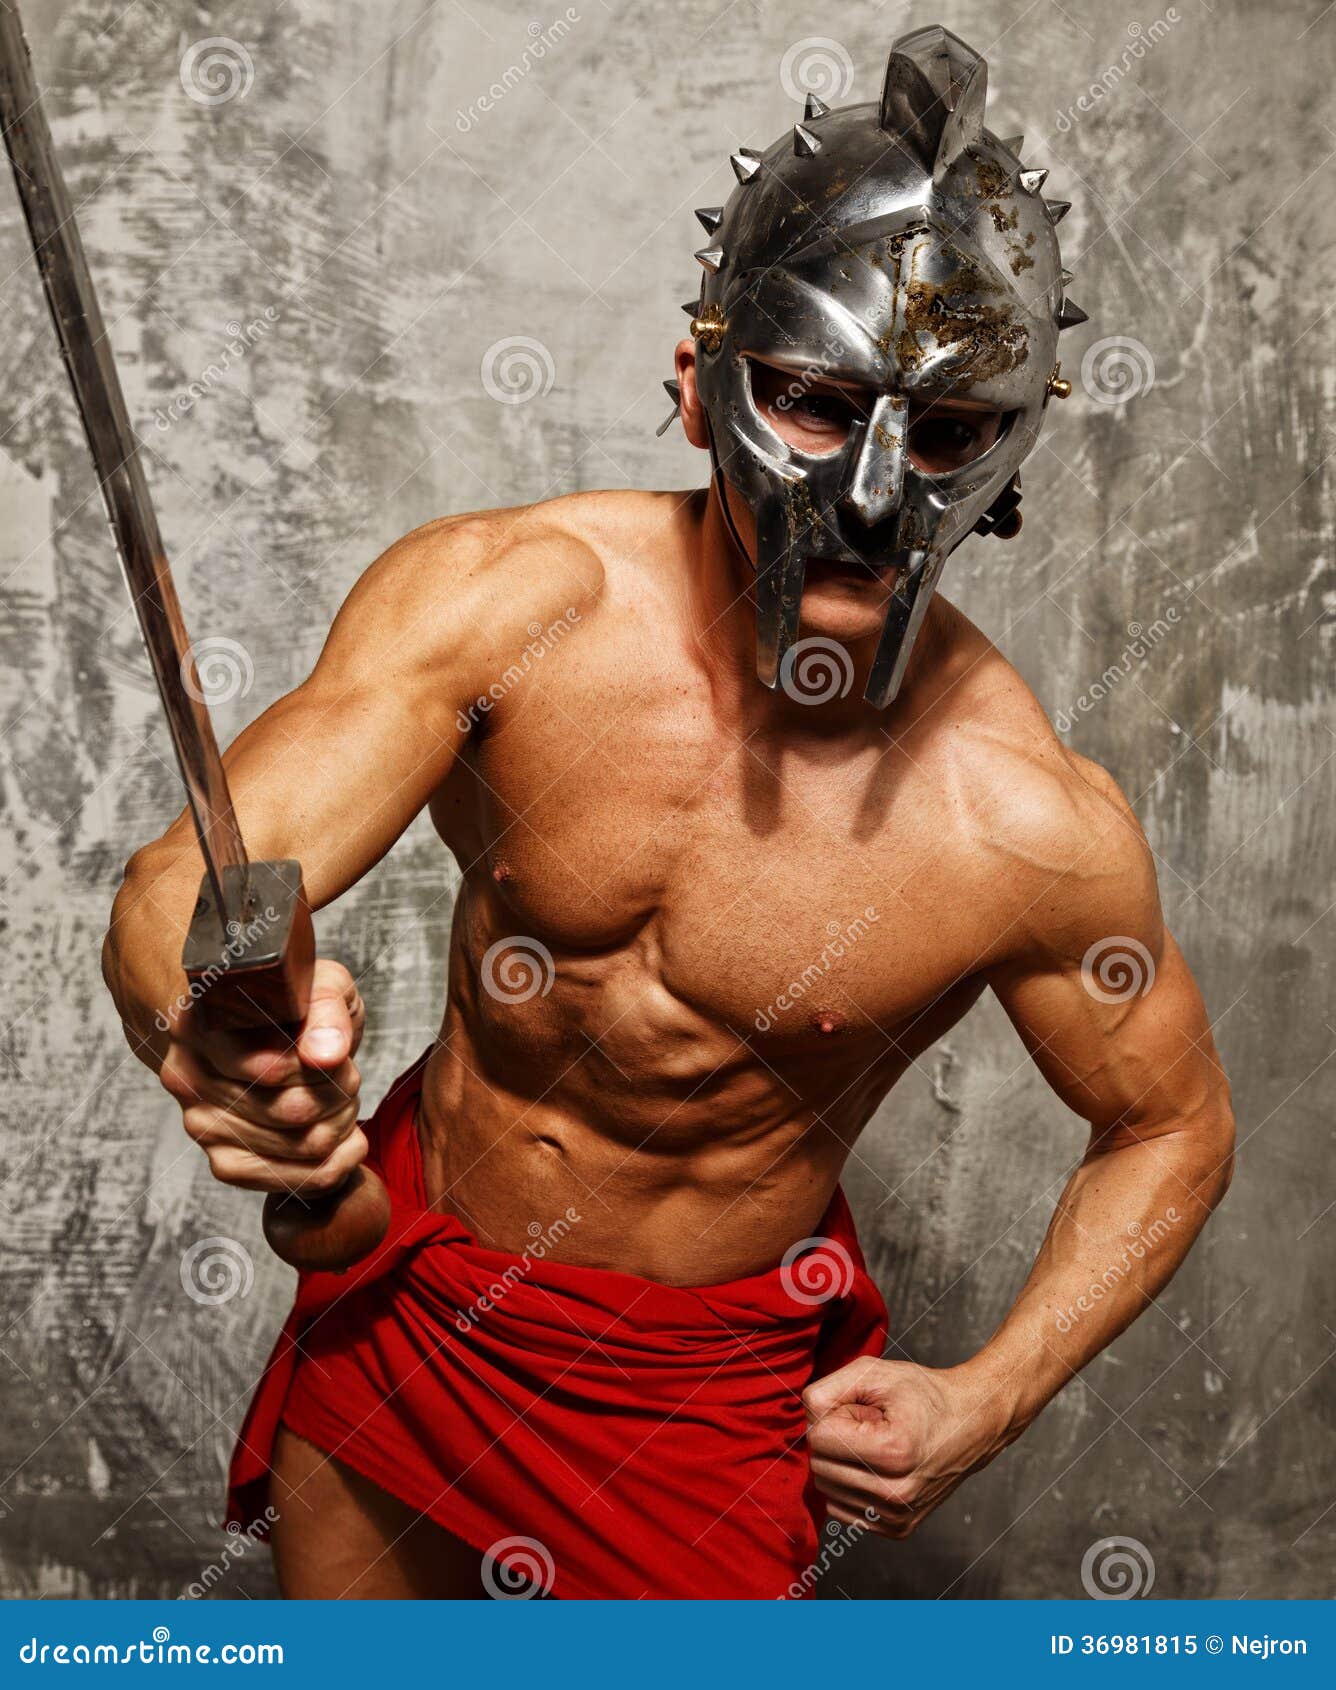 Gladiator with Muscular Body Stock Image - Image of biceps, health ...